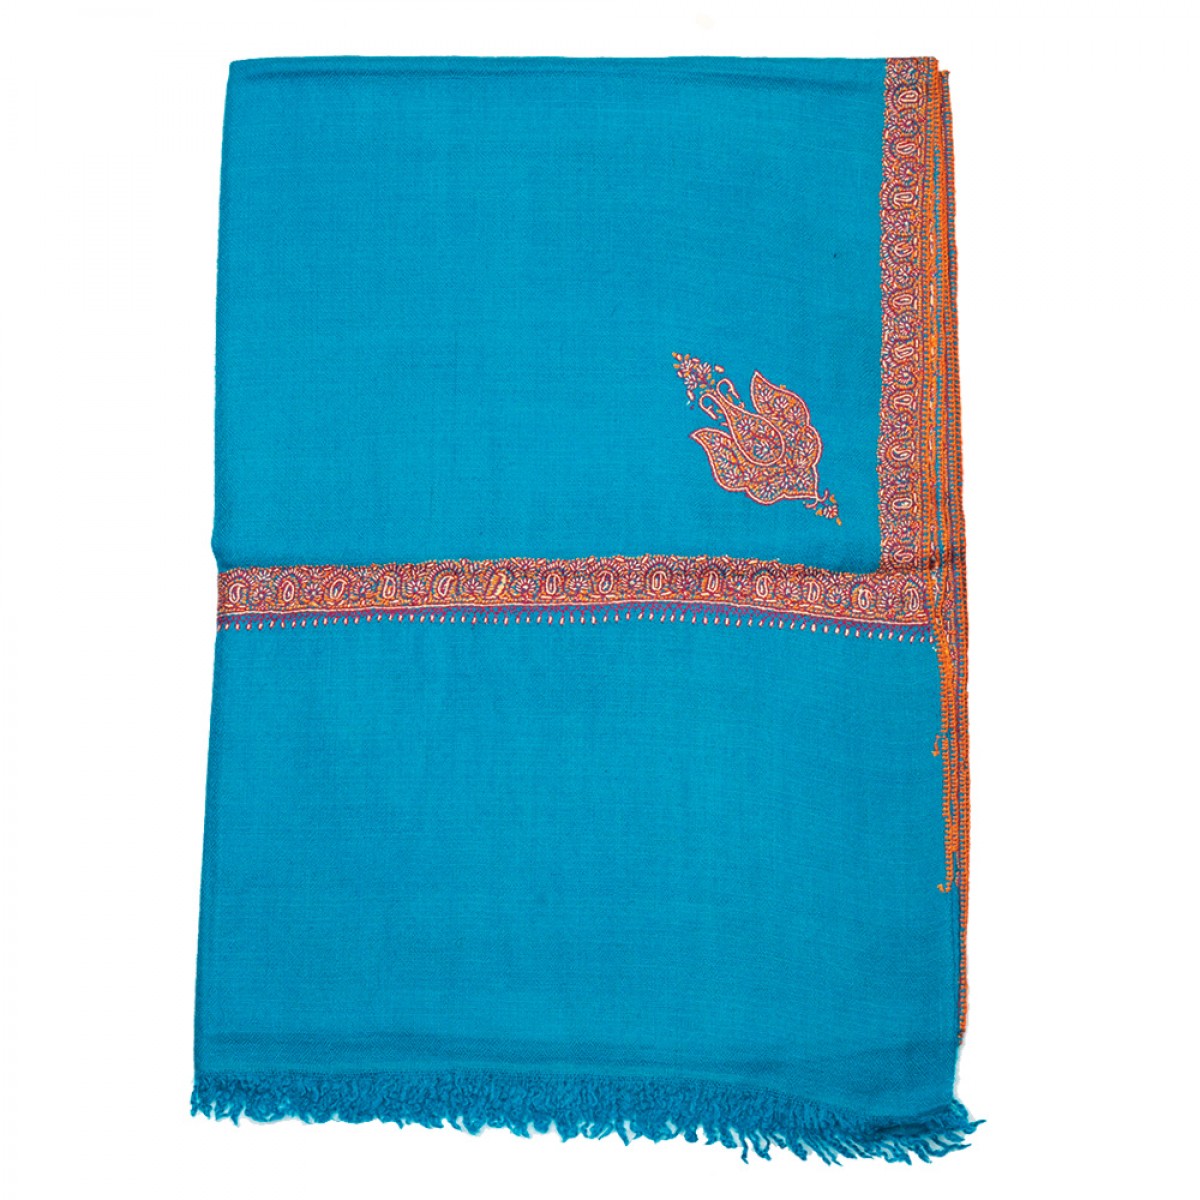 Embroidered Pashmina stole - Blue & Red